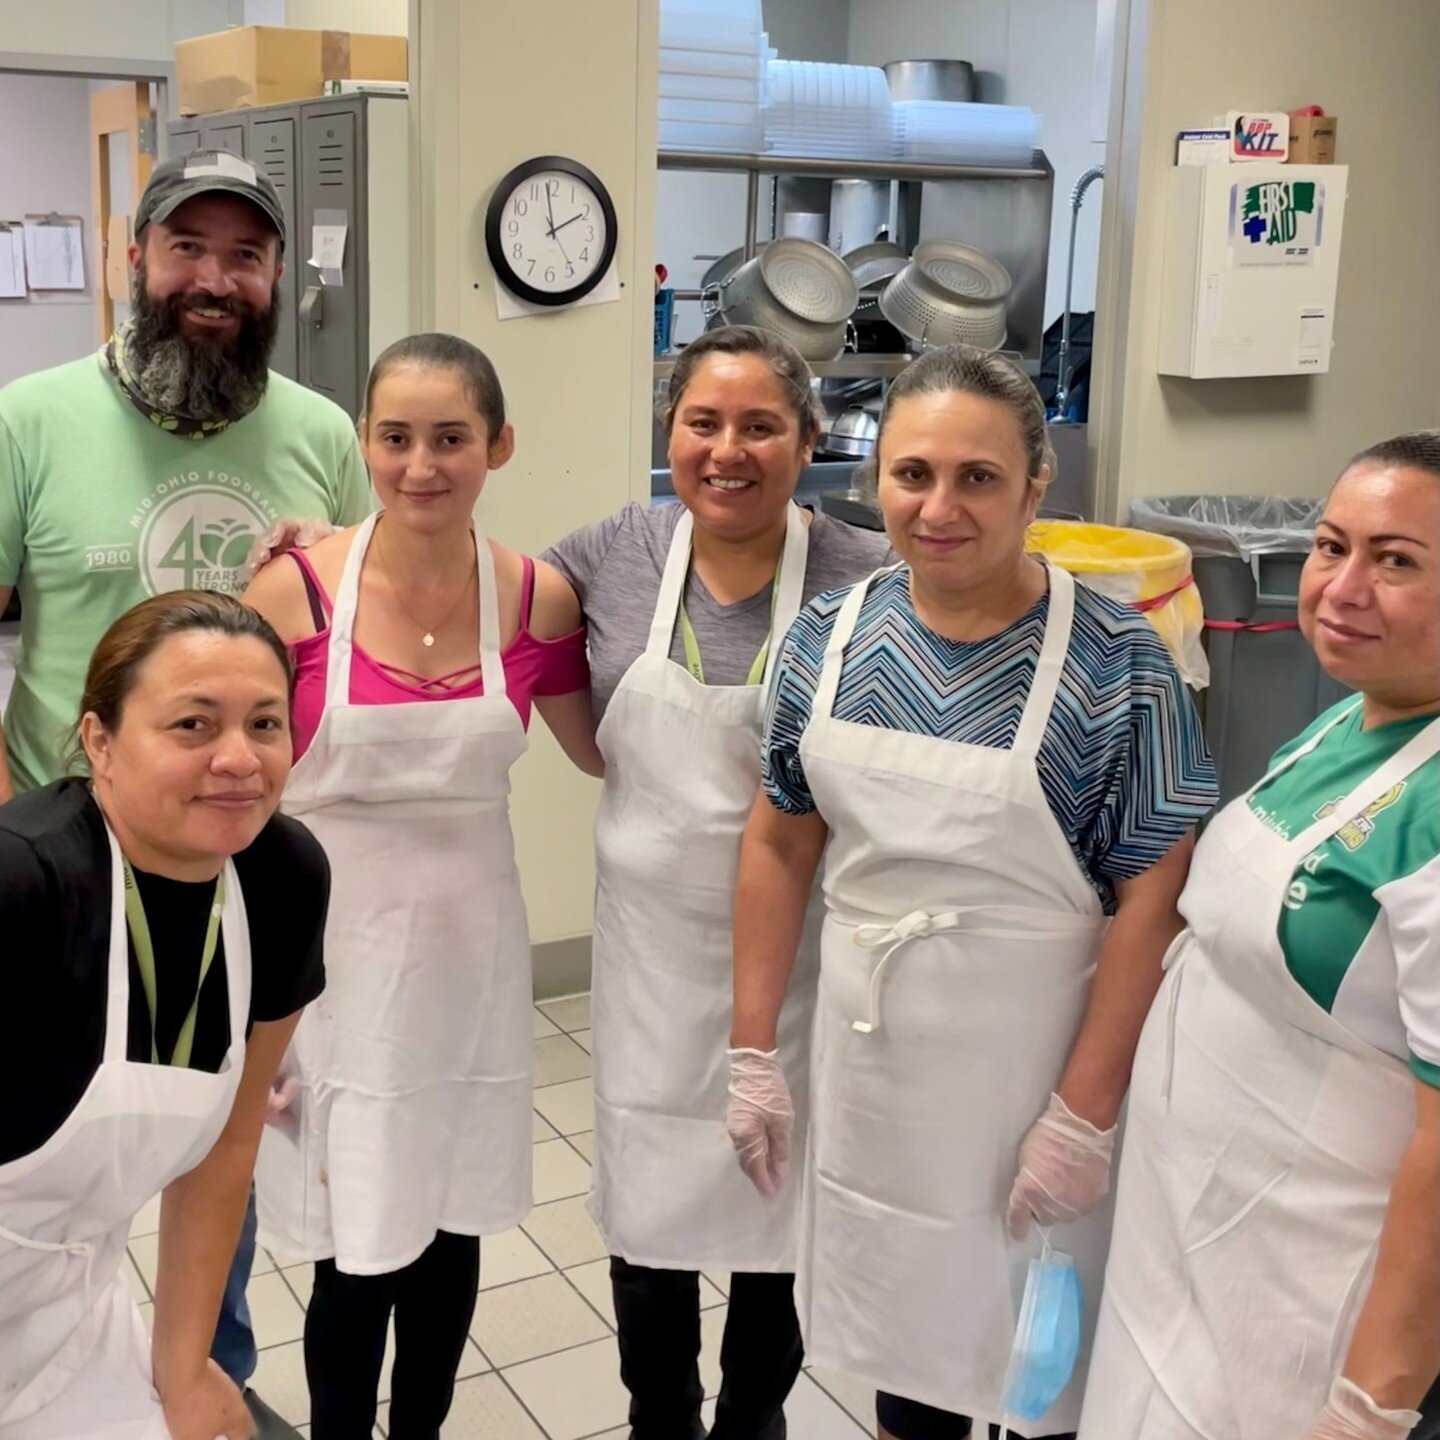 Last week we wrapped up our summer partnership with the Mid-Ohio Food Collective kitchen! Members of the FRESHEALTH team prepared over 80,000 meals for children in the greater Columbus area. 

This partnership allowed us to make an impact in our comm